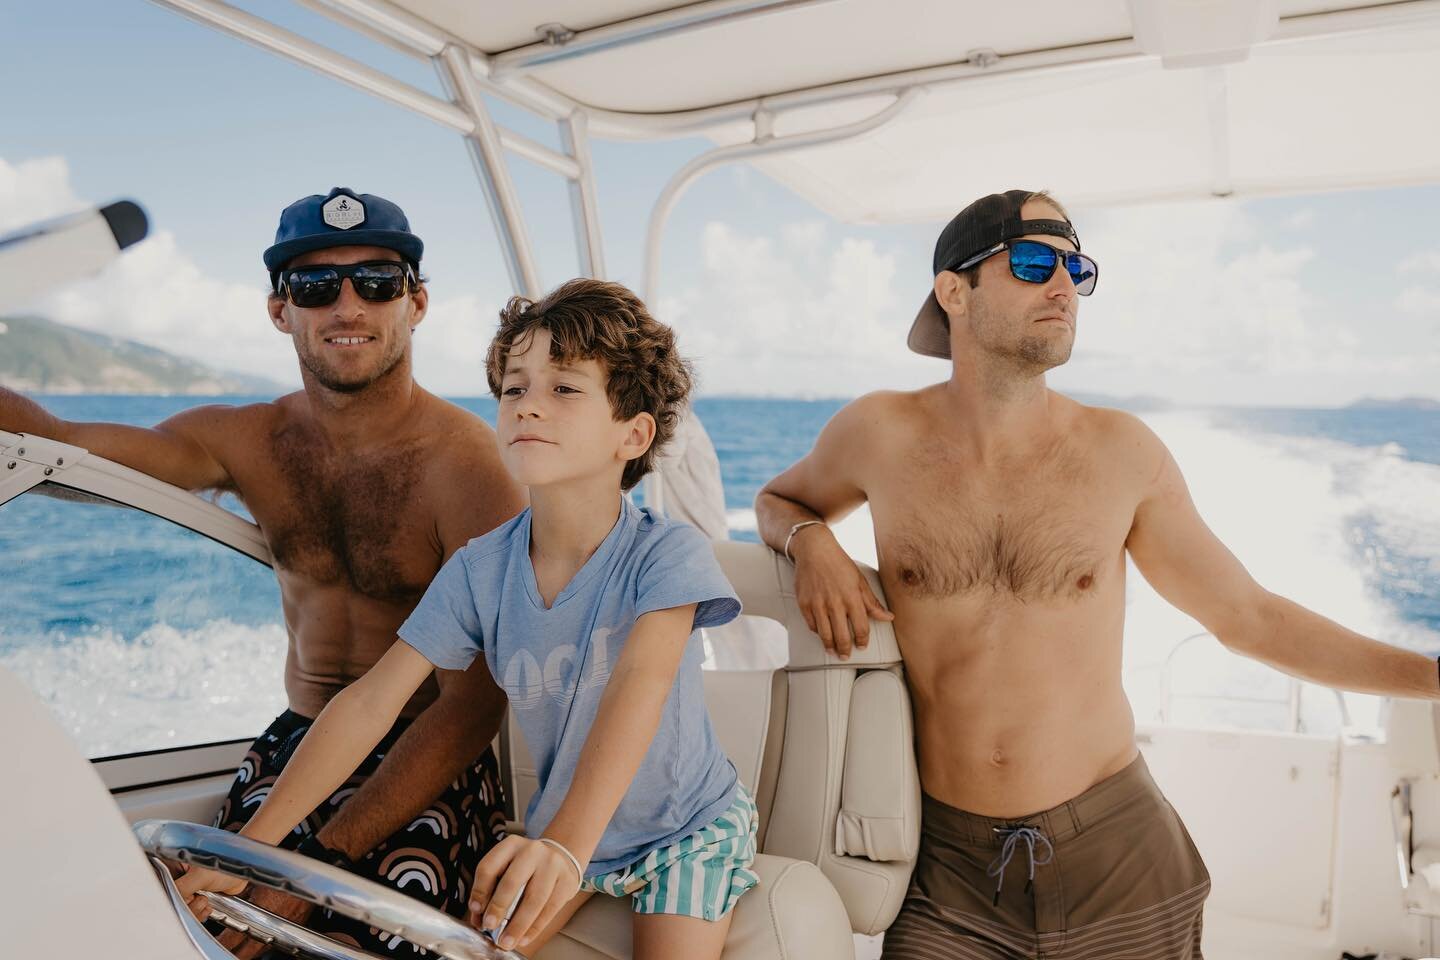 There&rsquo;s a new captain on board
📷 @sarahbswan 

#charter #charterboat #vacation #usvi #vi #bvi #stjohn #stthomas #visitusvi #vacationgoals #passionpassport #caribbean #caribbeanvacation #boating #worldcat #virginislands #yamahaoutboards #explor